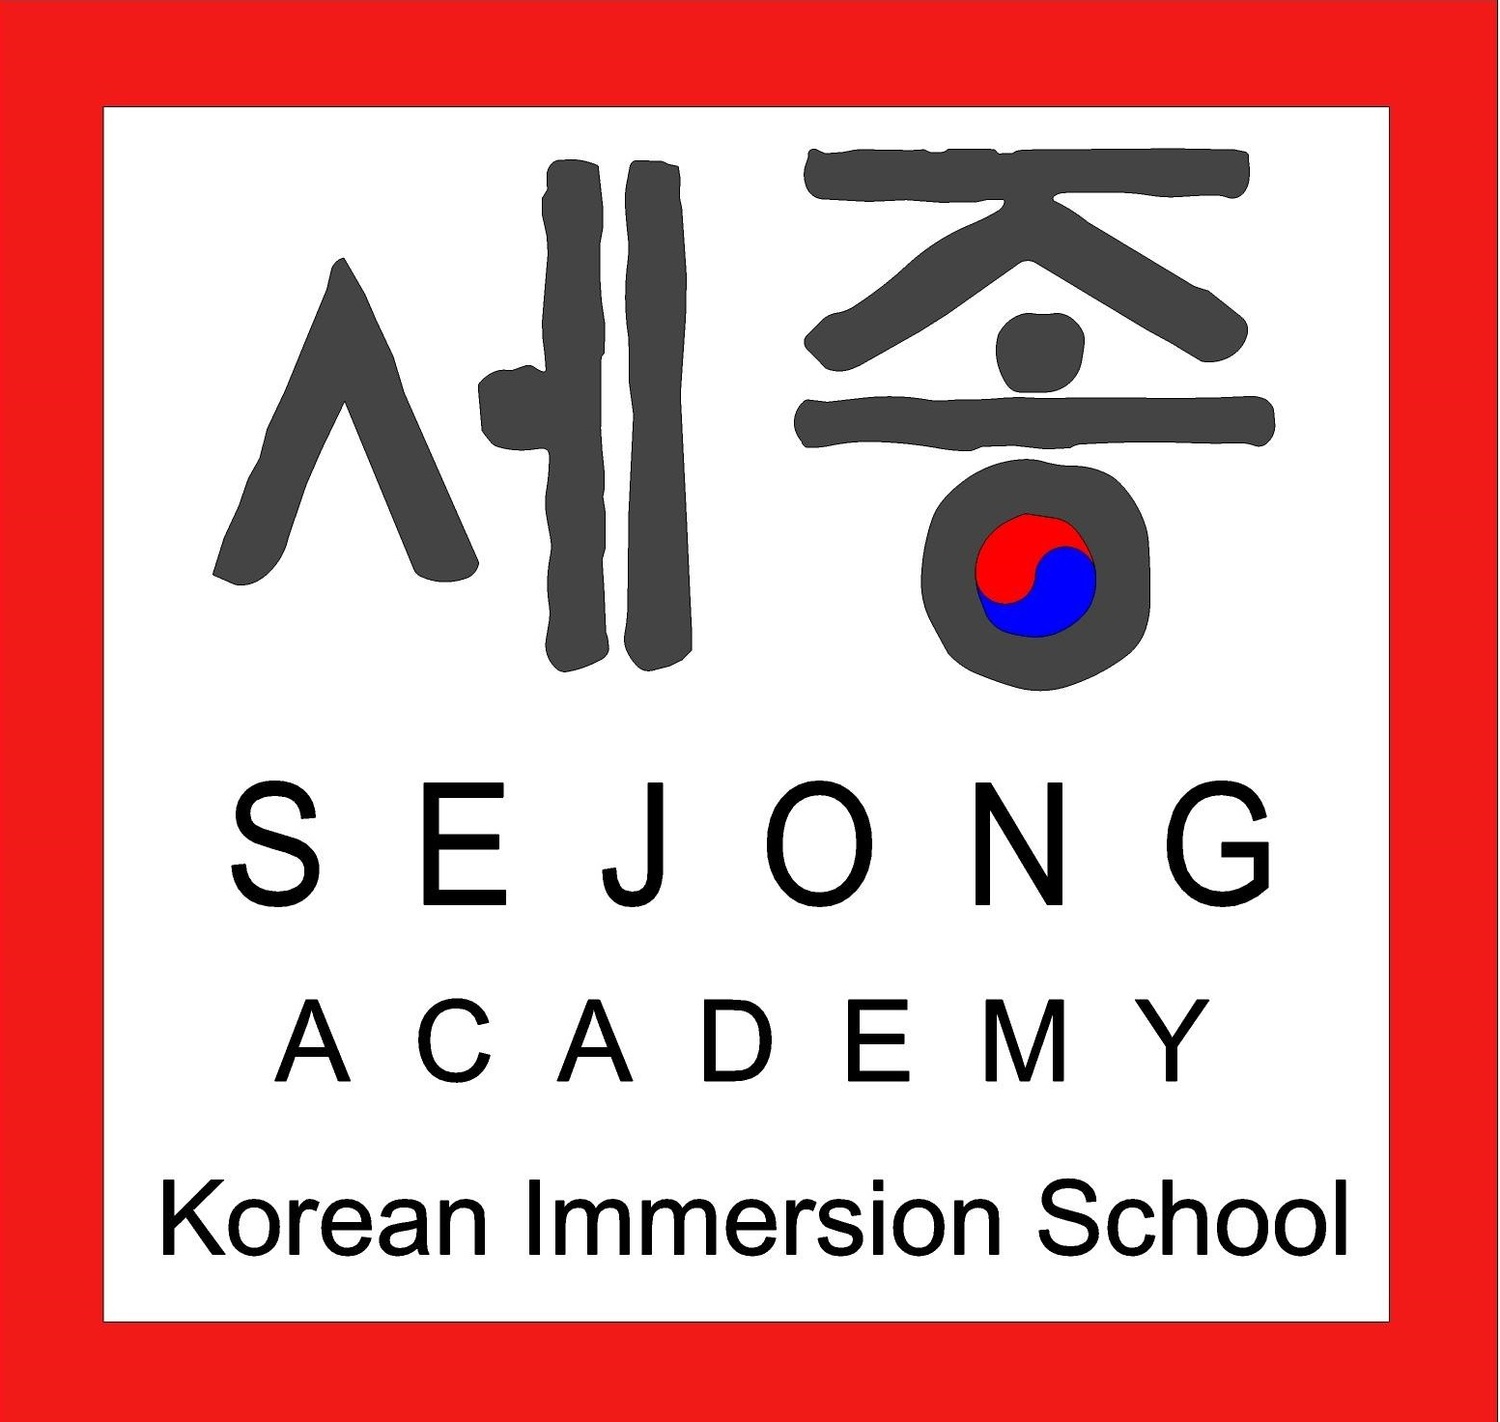 Sejong Academy: A Tuition-FREE Korean Immersion Charter School